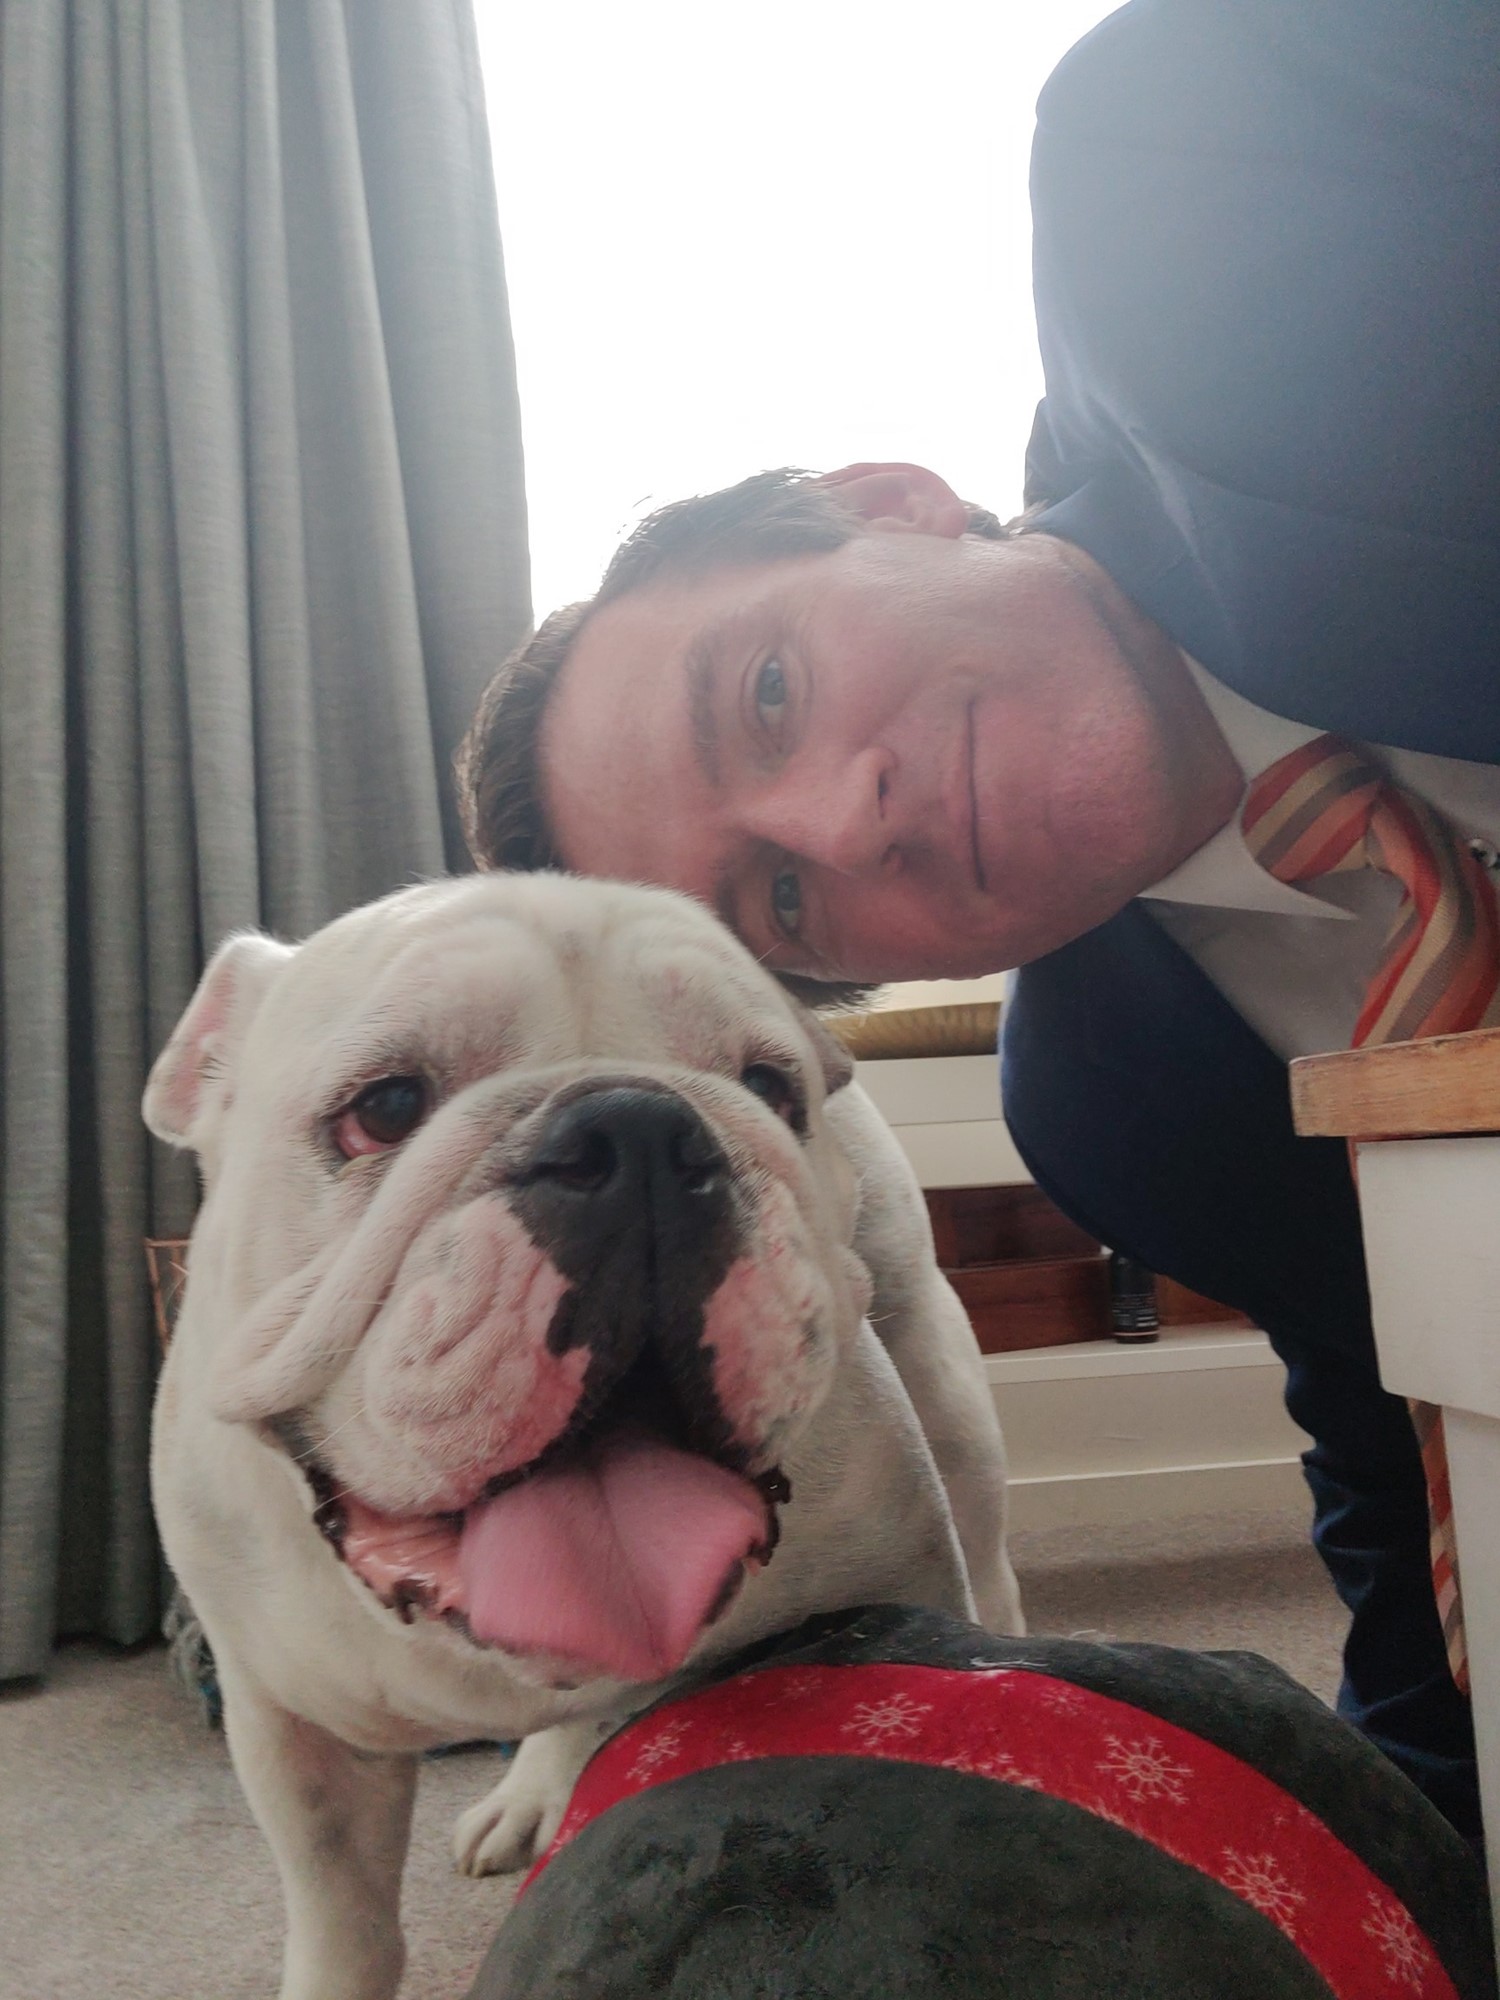 A man poses for a selfie with his bulldog.